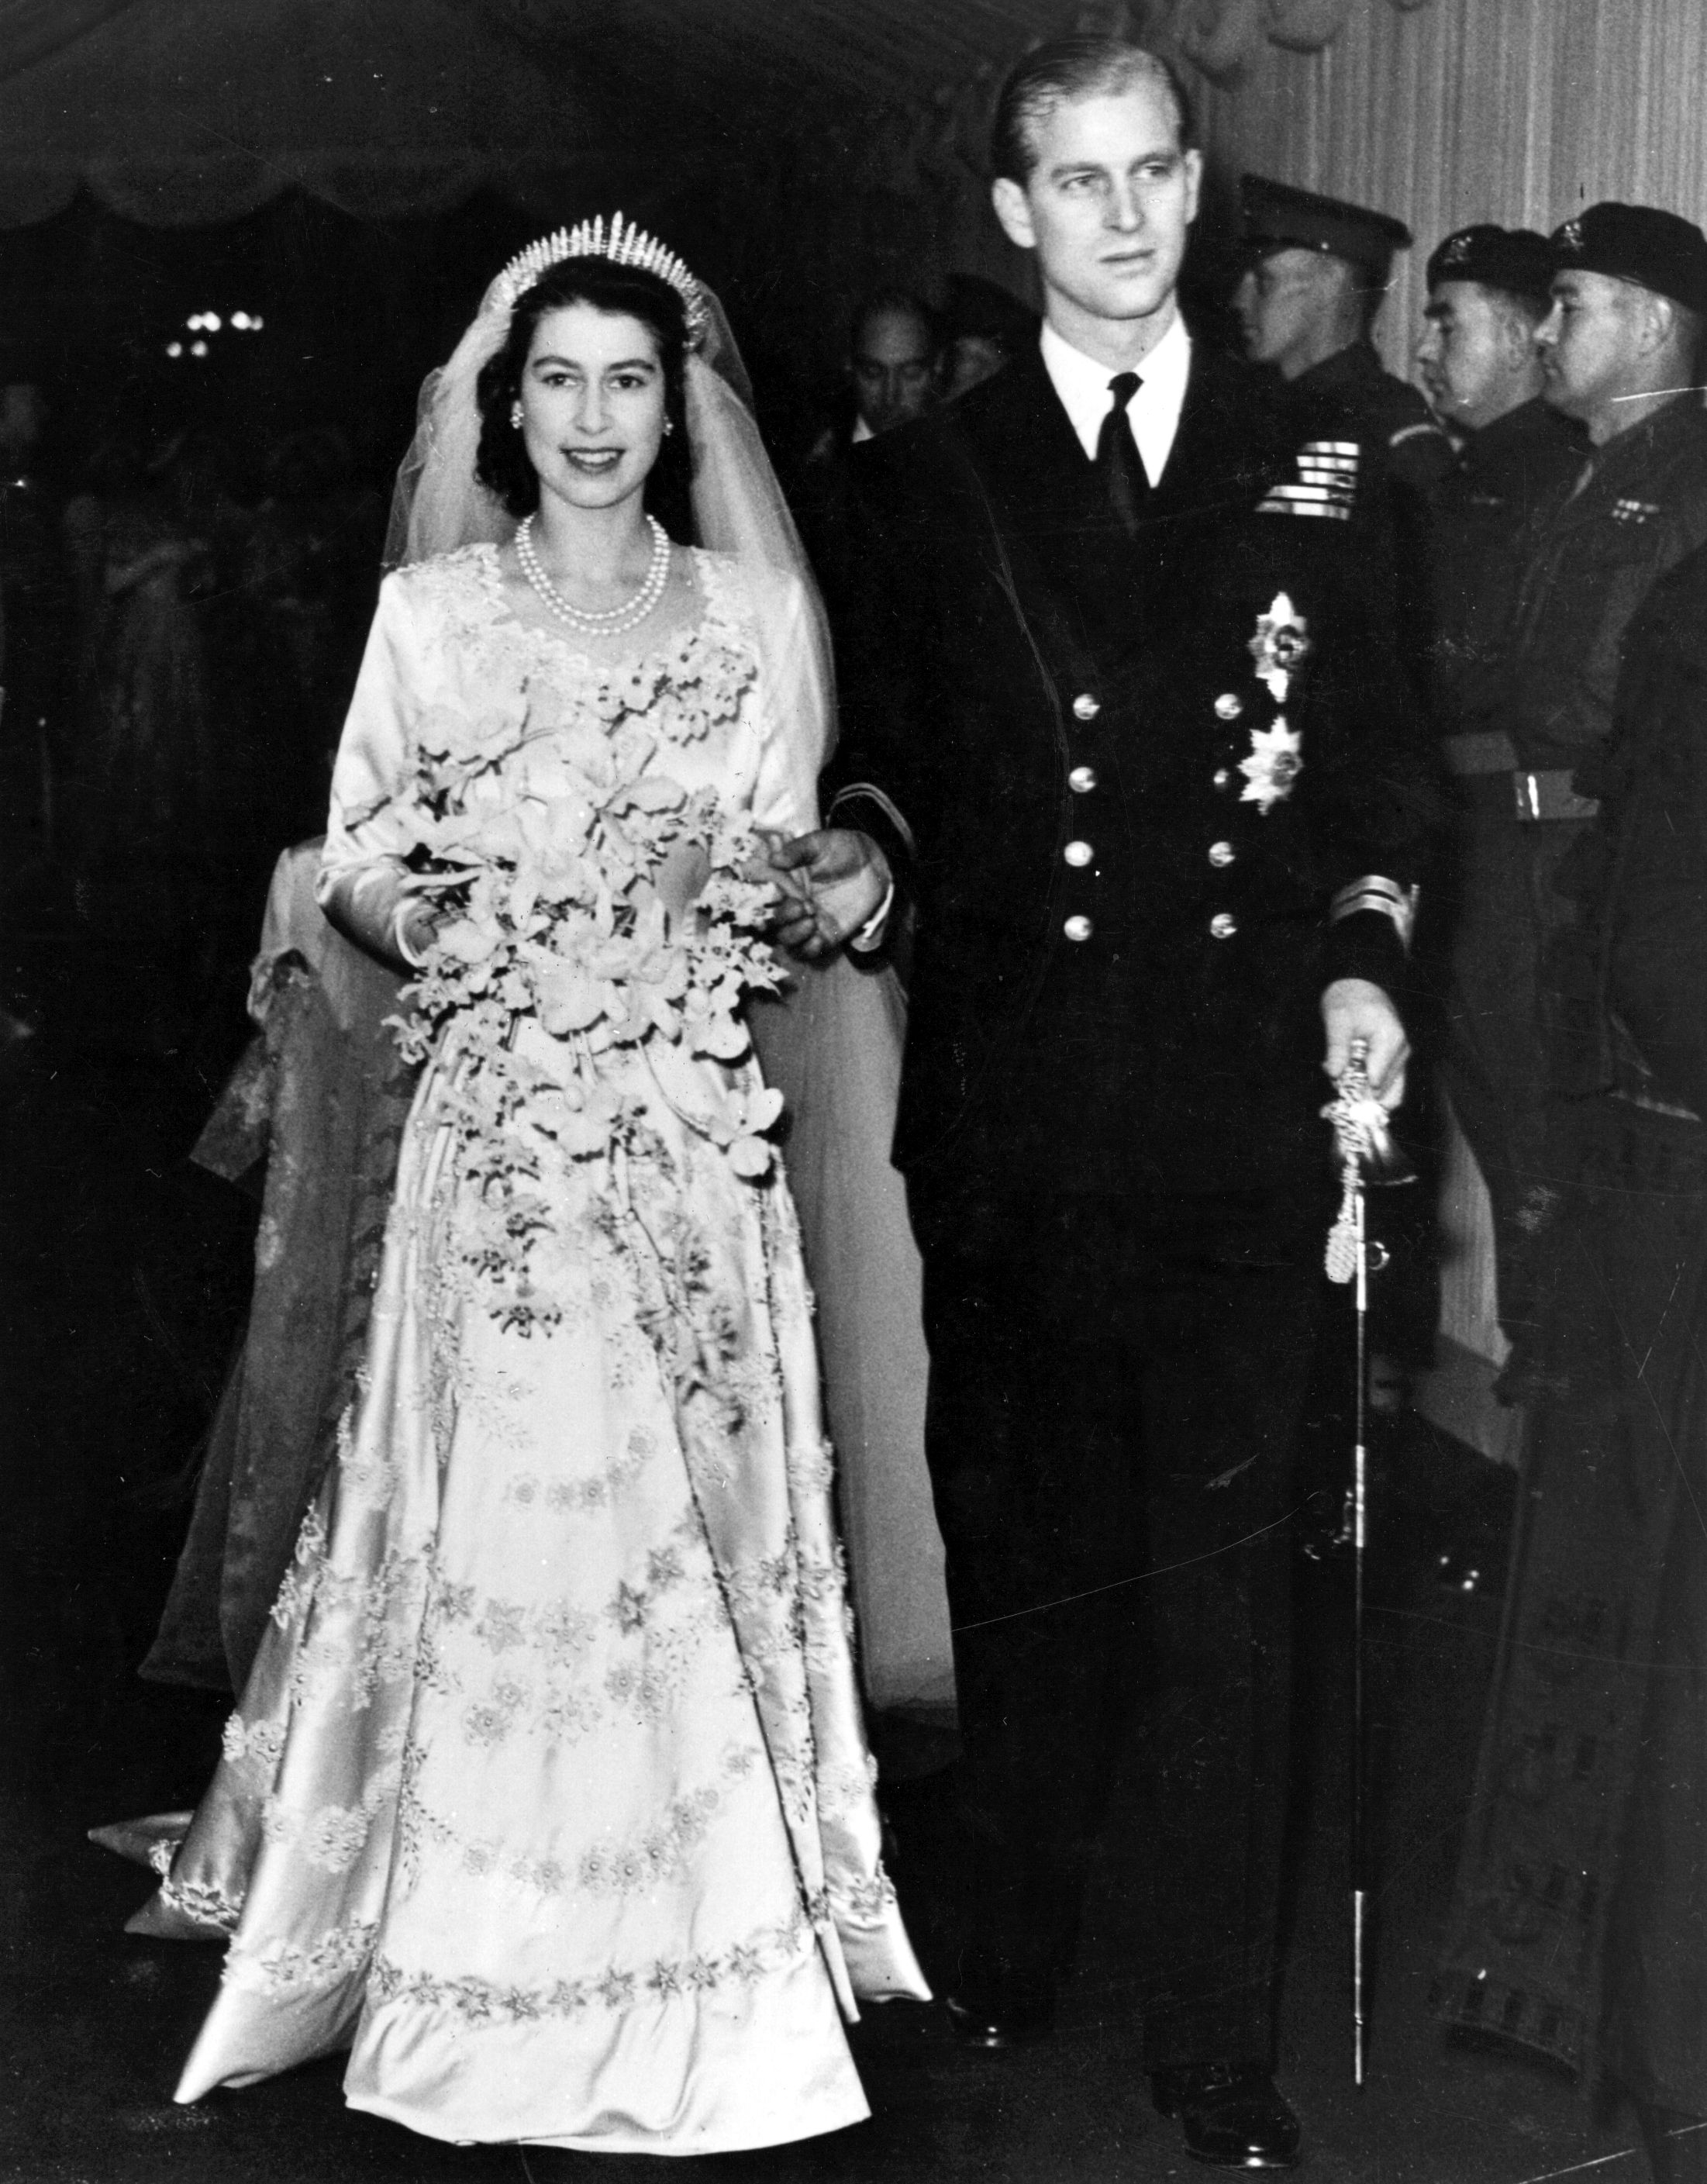 Queen Elizabeth and Prince Philip pictured at their wedding in 1947, London, England. | Photo: Getty Images